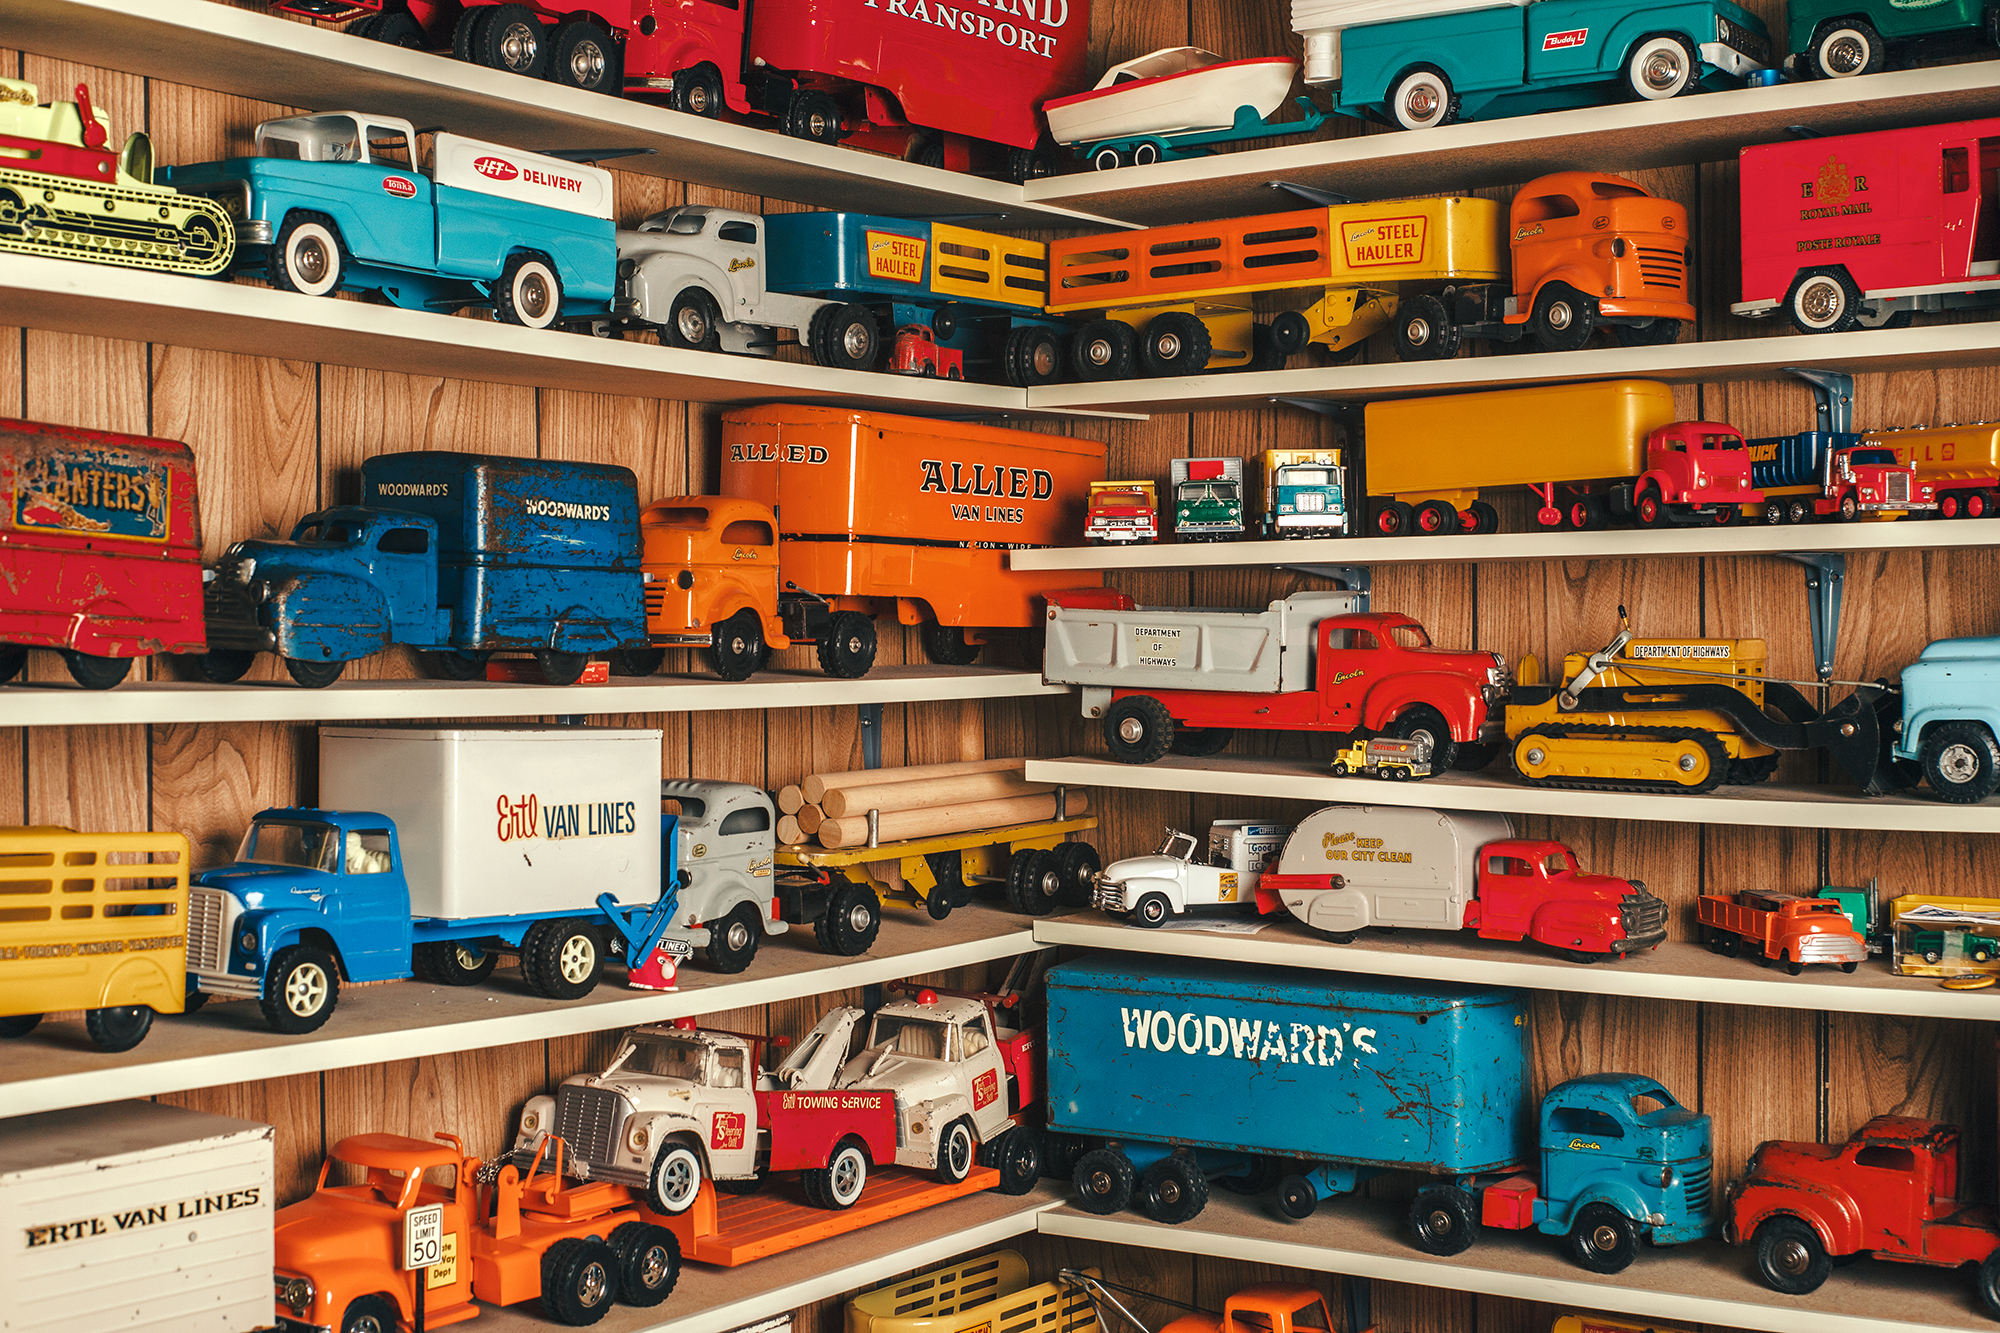 Brightly coloured vintage toy trucks arranged on shelves, example of student photography